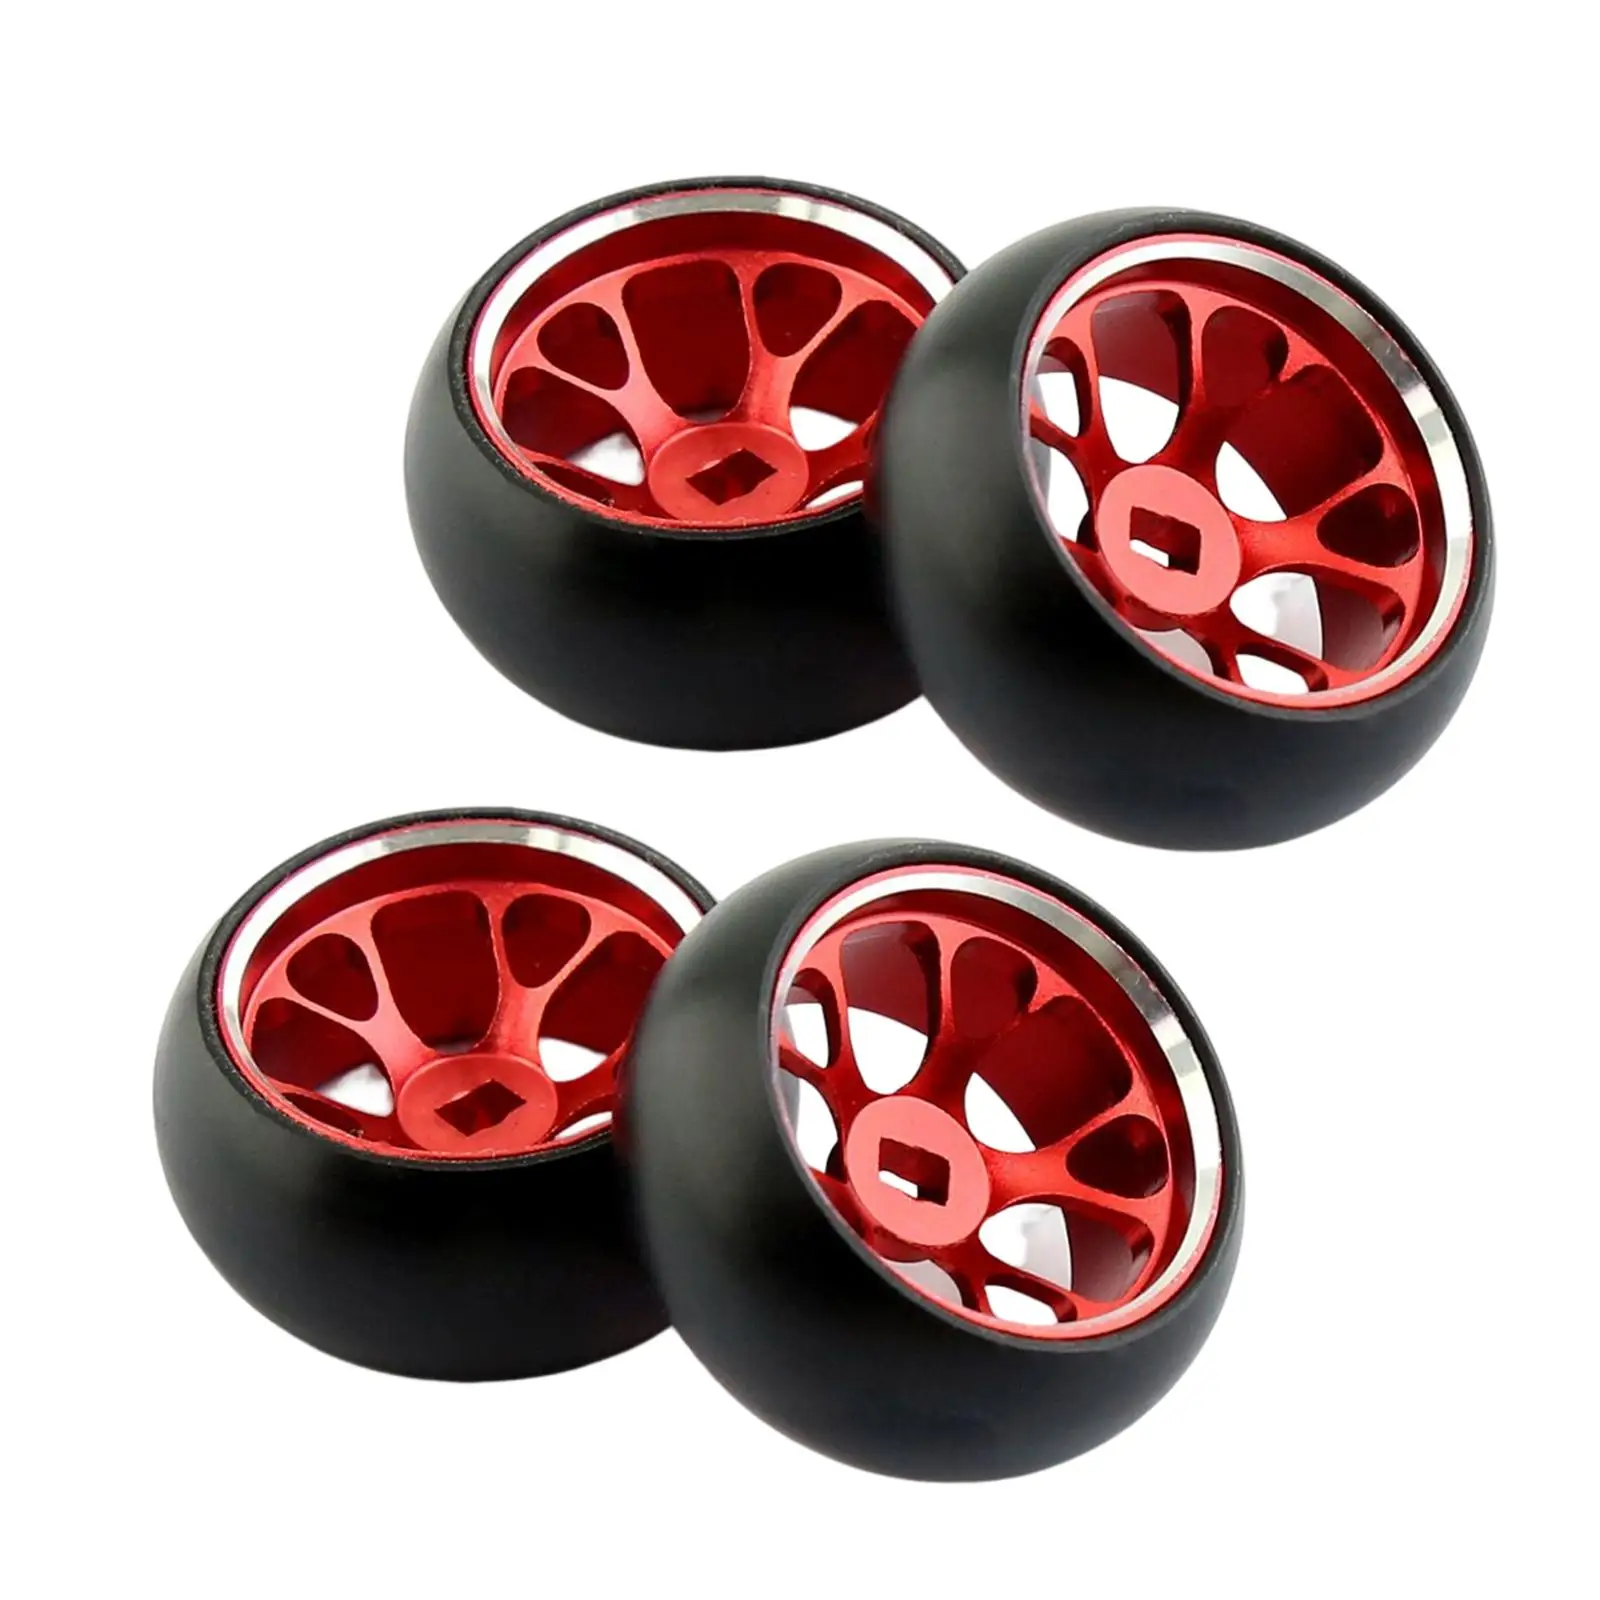 4Pcs 1:28 Scale RC Car Tires Upgrade Parts Replacement for K989 K969 P939 RC Car